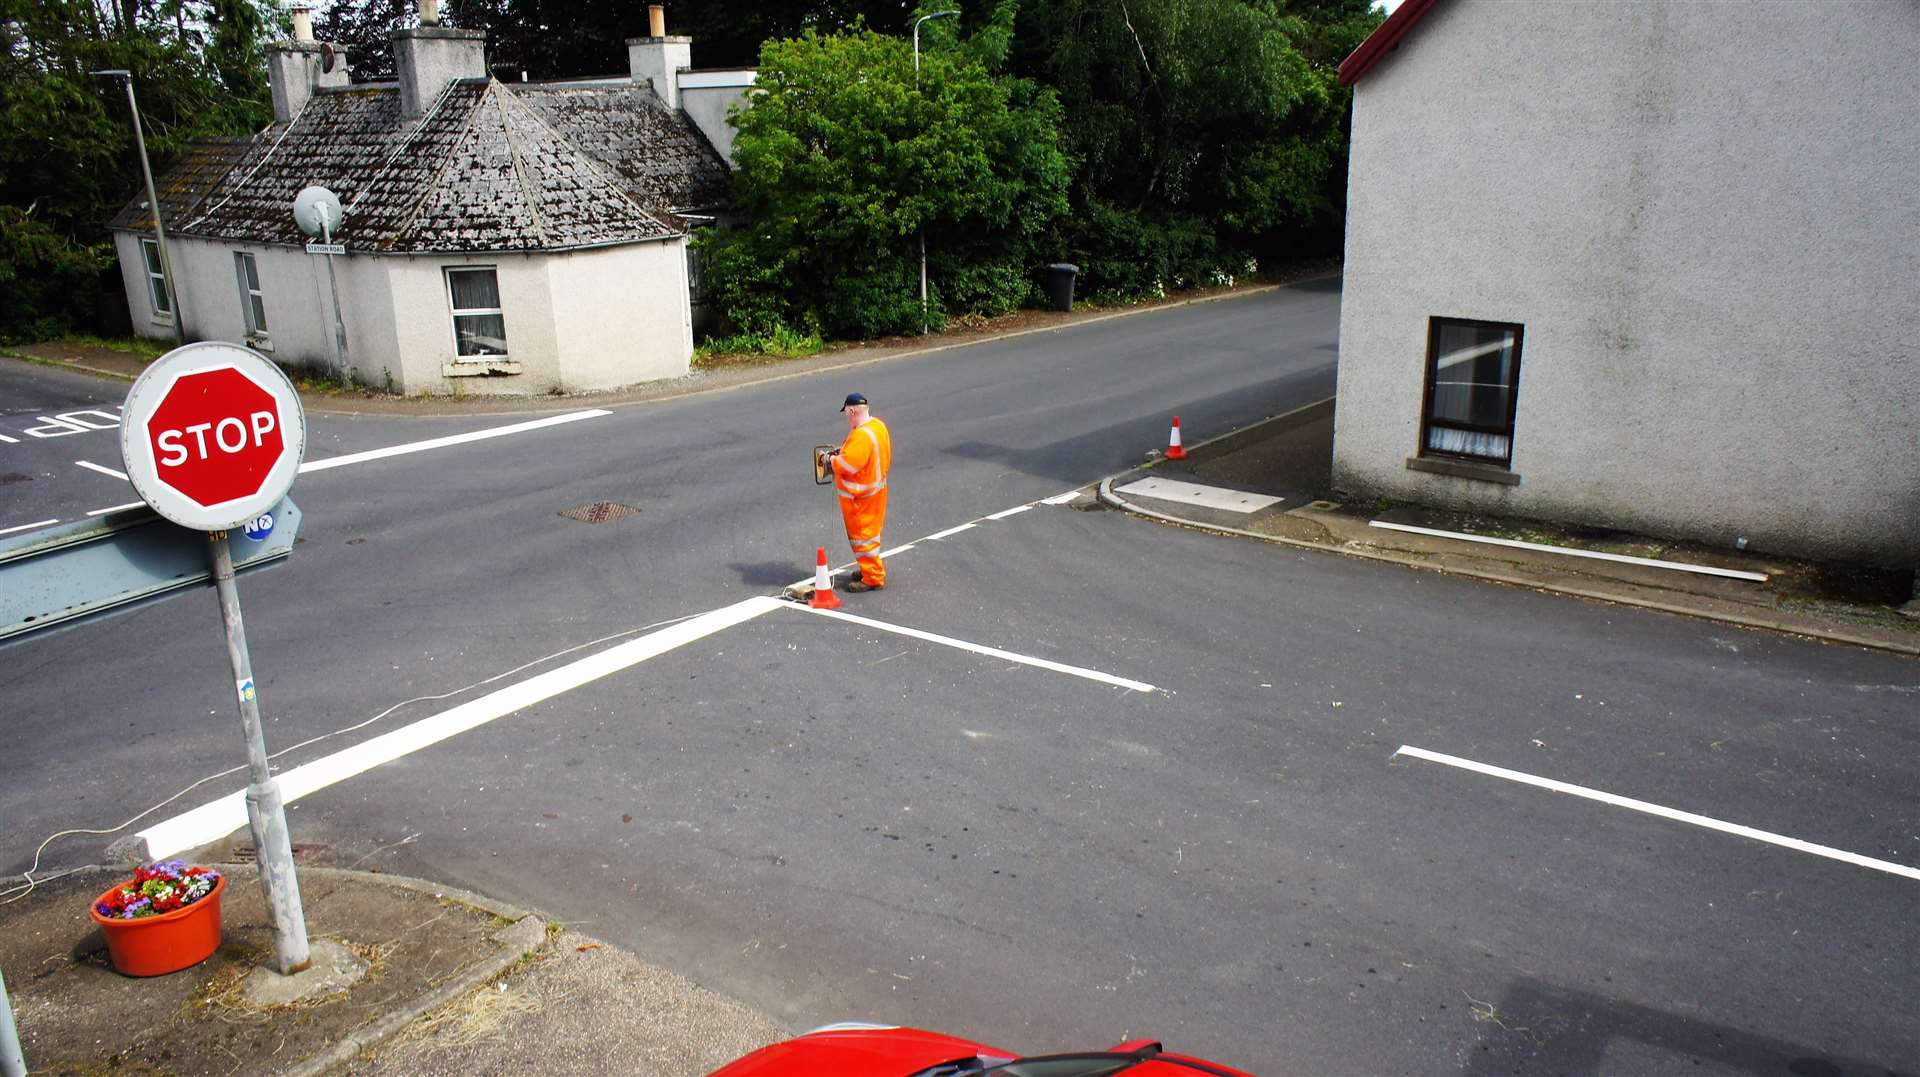 Lines were painted at the accident blackspot recently in Watten. Picture: DGS